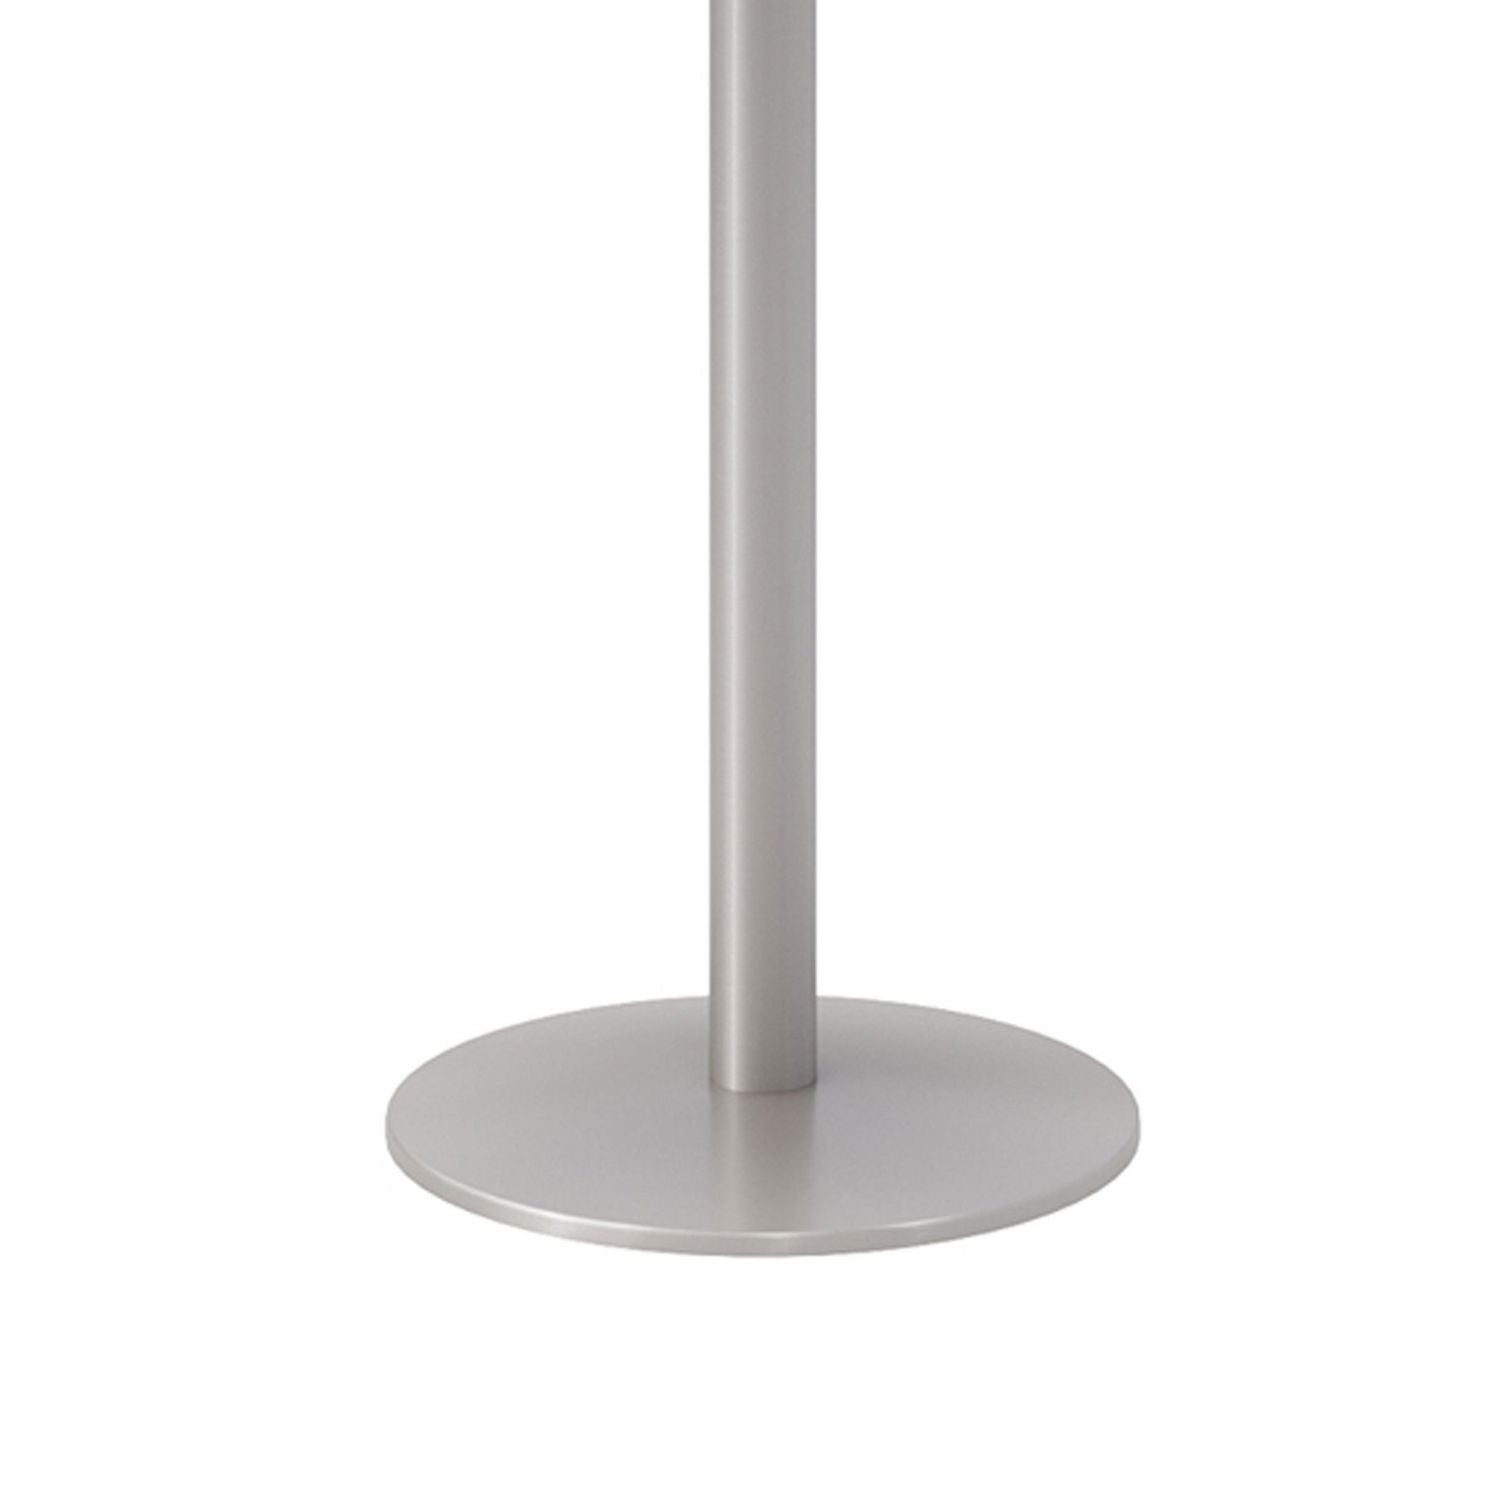 pedestal-bistro-table-with-four-lime-green-kool-series-barstools-round-36-dia-x-41h-designer-white-ships-in-4-6-bus-days_kfi811774037112 - 3